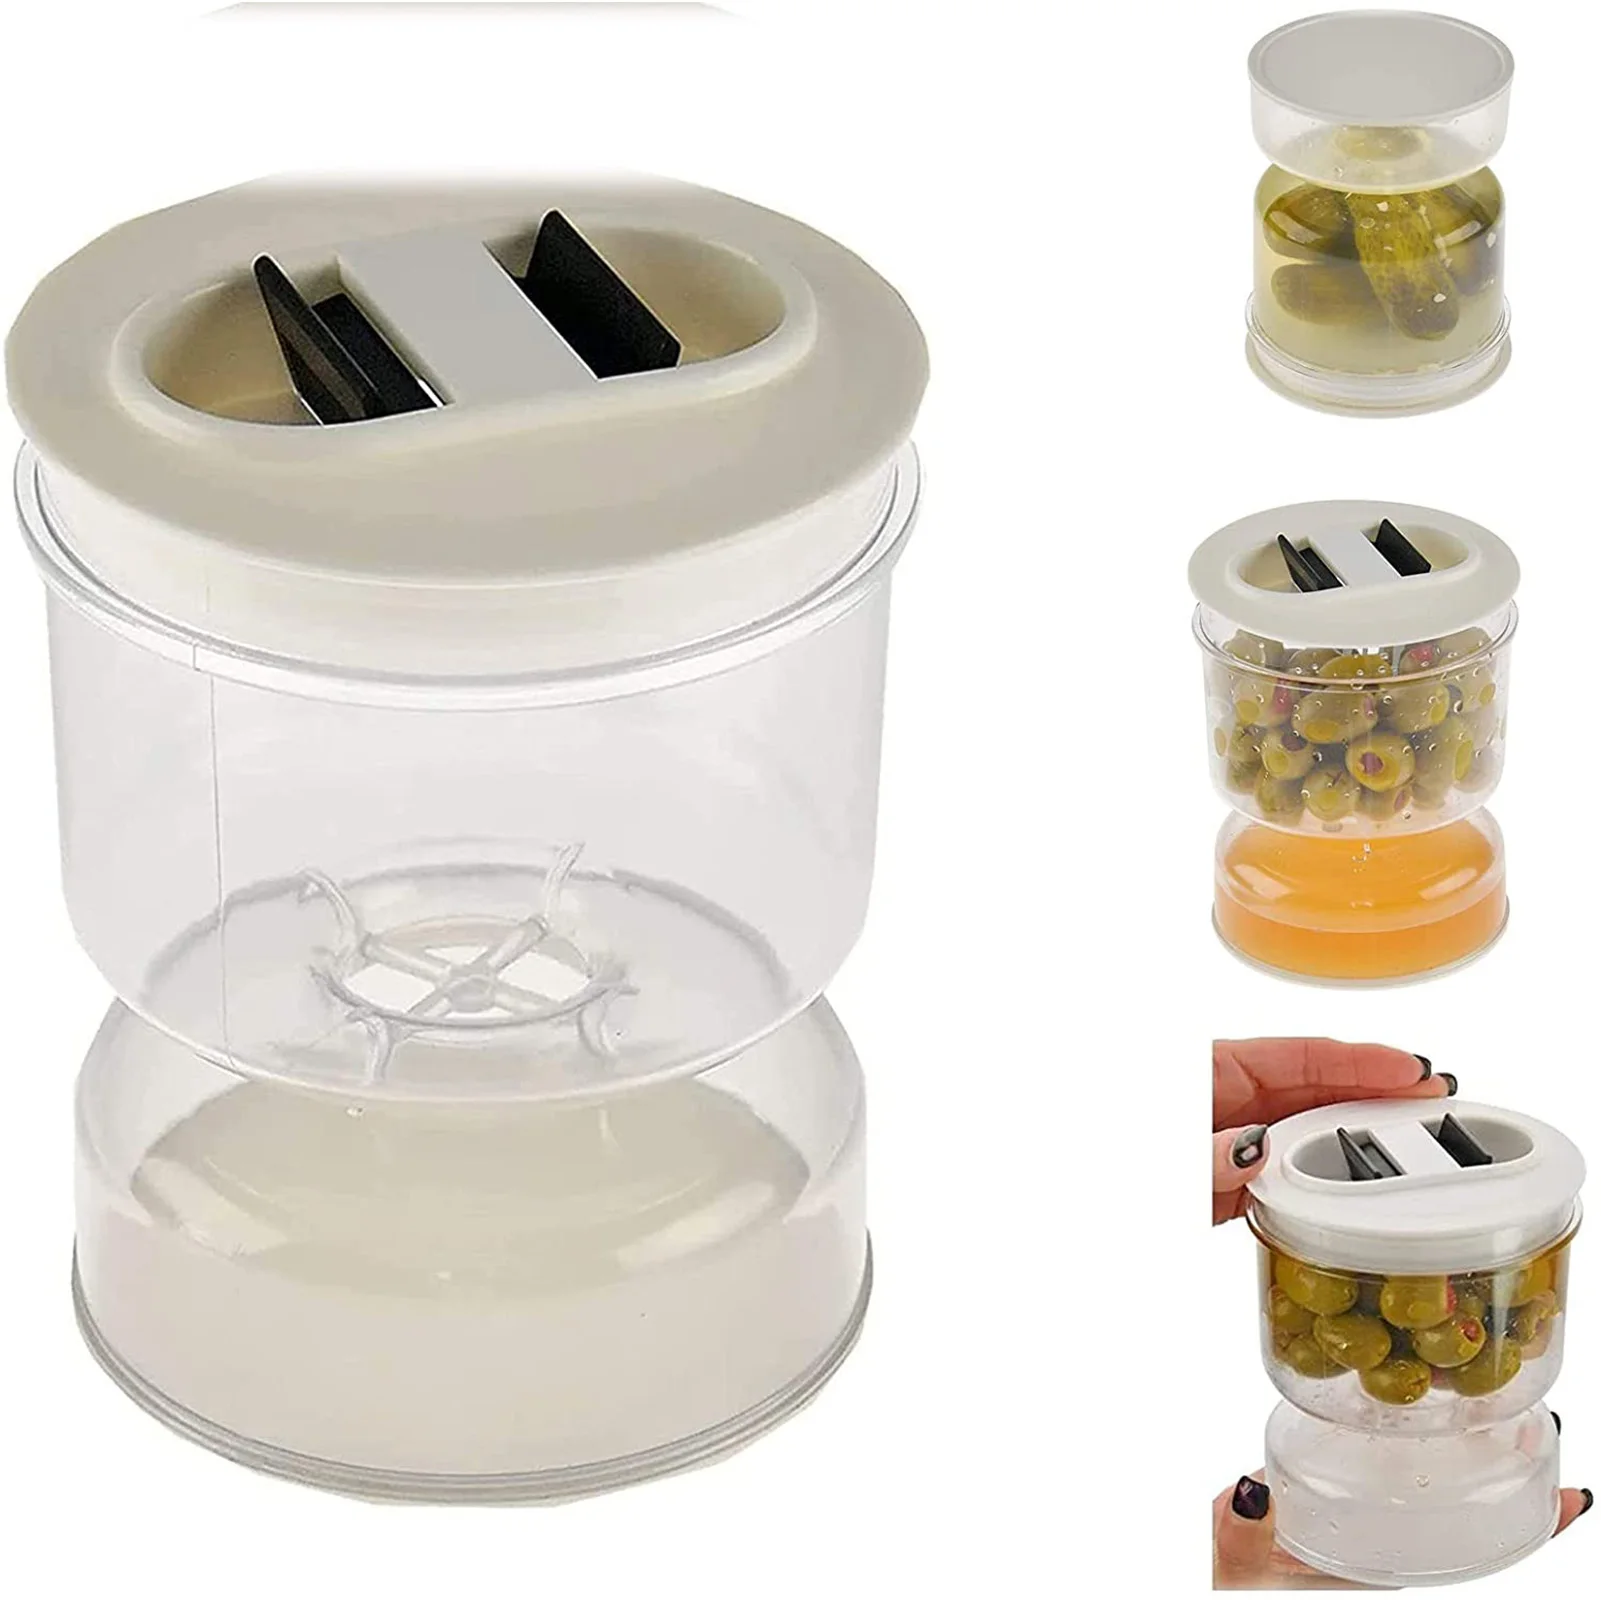 Pickles Jar Dry and Wet Dispenser Pickles Hourglass Jar with Strainer Food Container for Home Kitchen  Separator Small Organizer